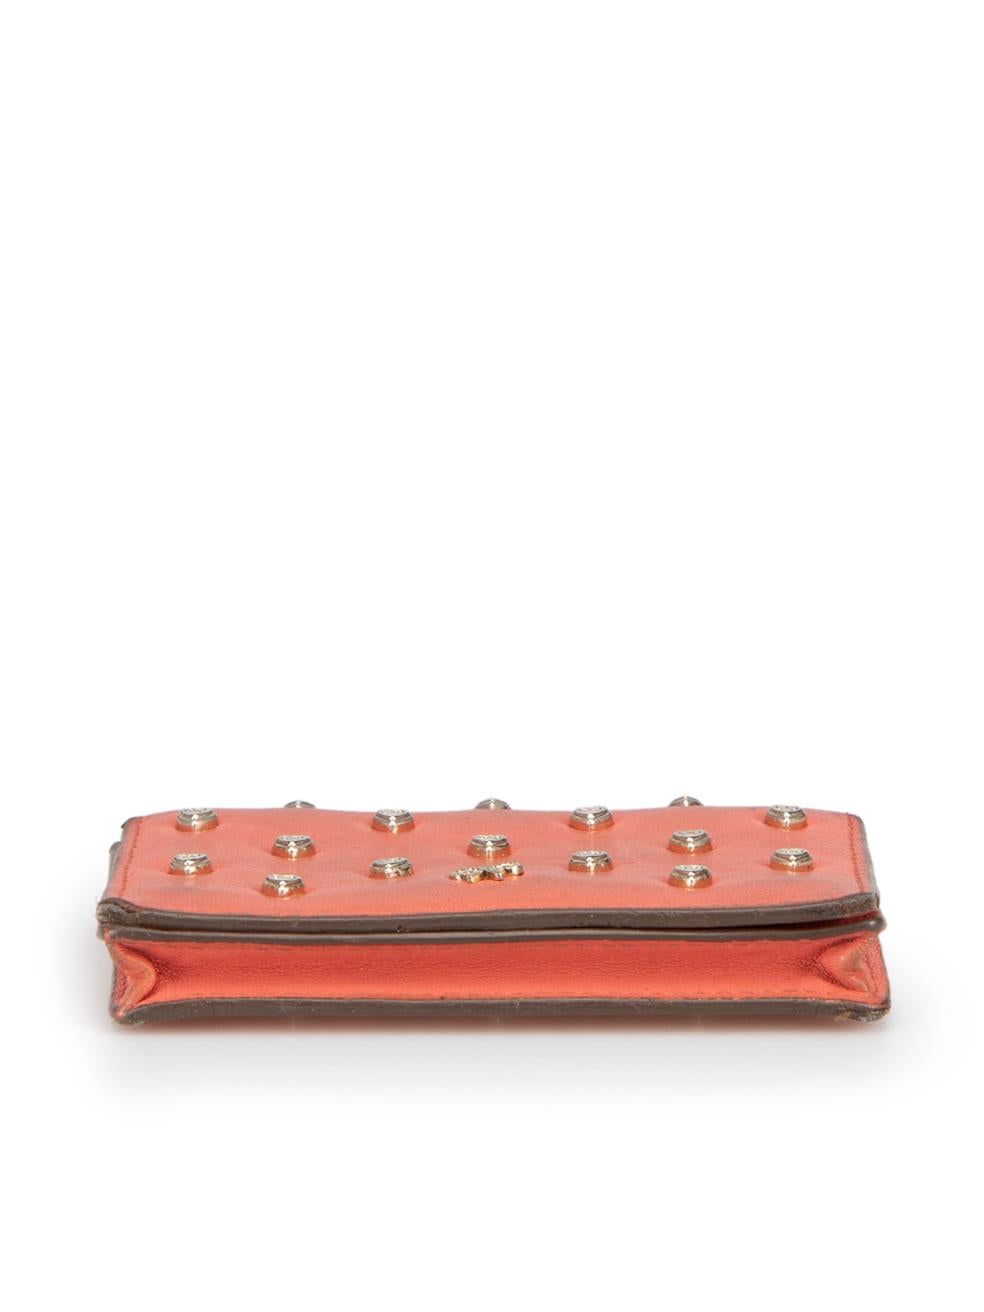 Anya Hindmarch Women's Coral Leather Joss Heart Studded Card Case For Sale 1